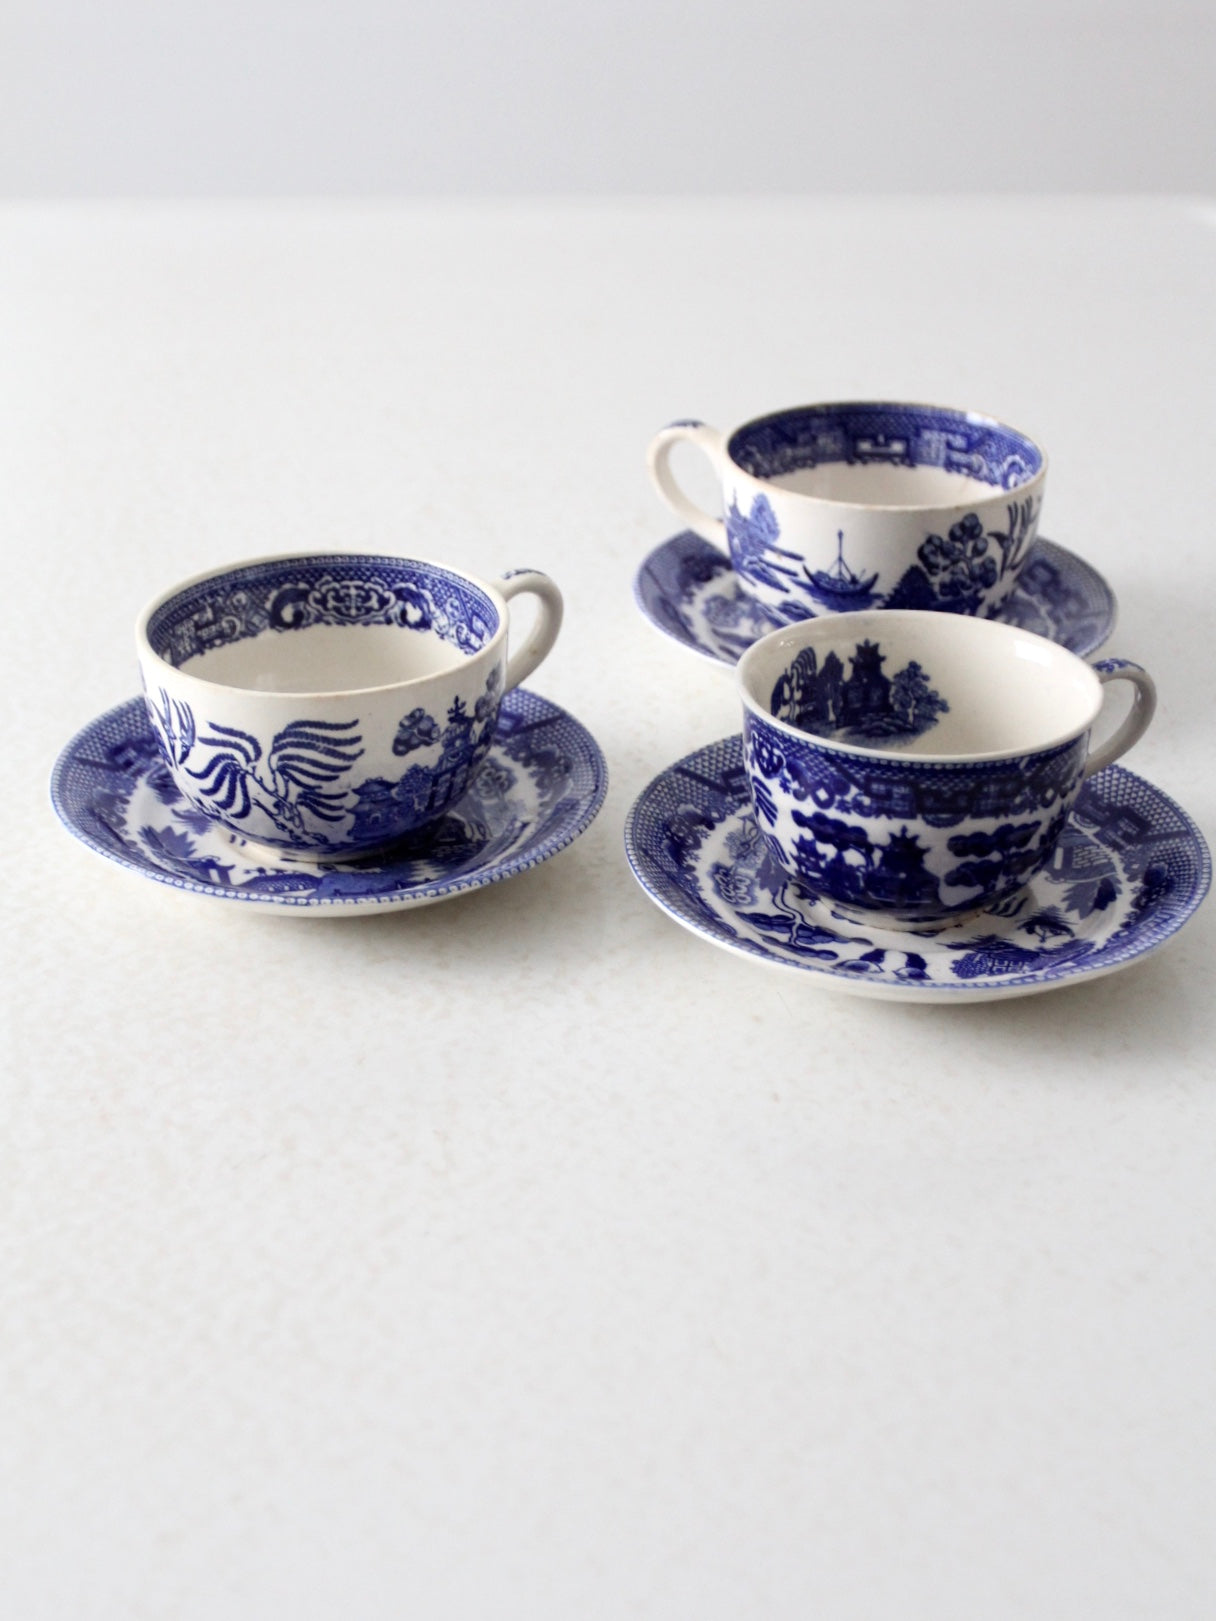 vintage blue willow tea cups with saucers set